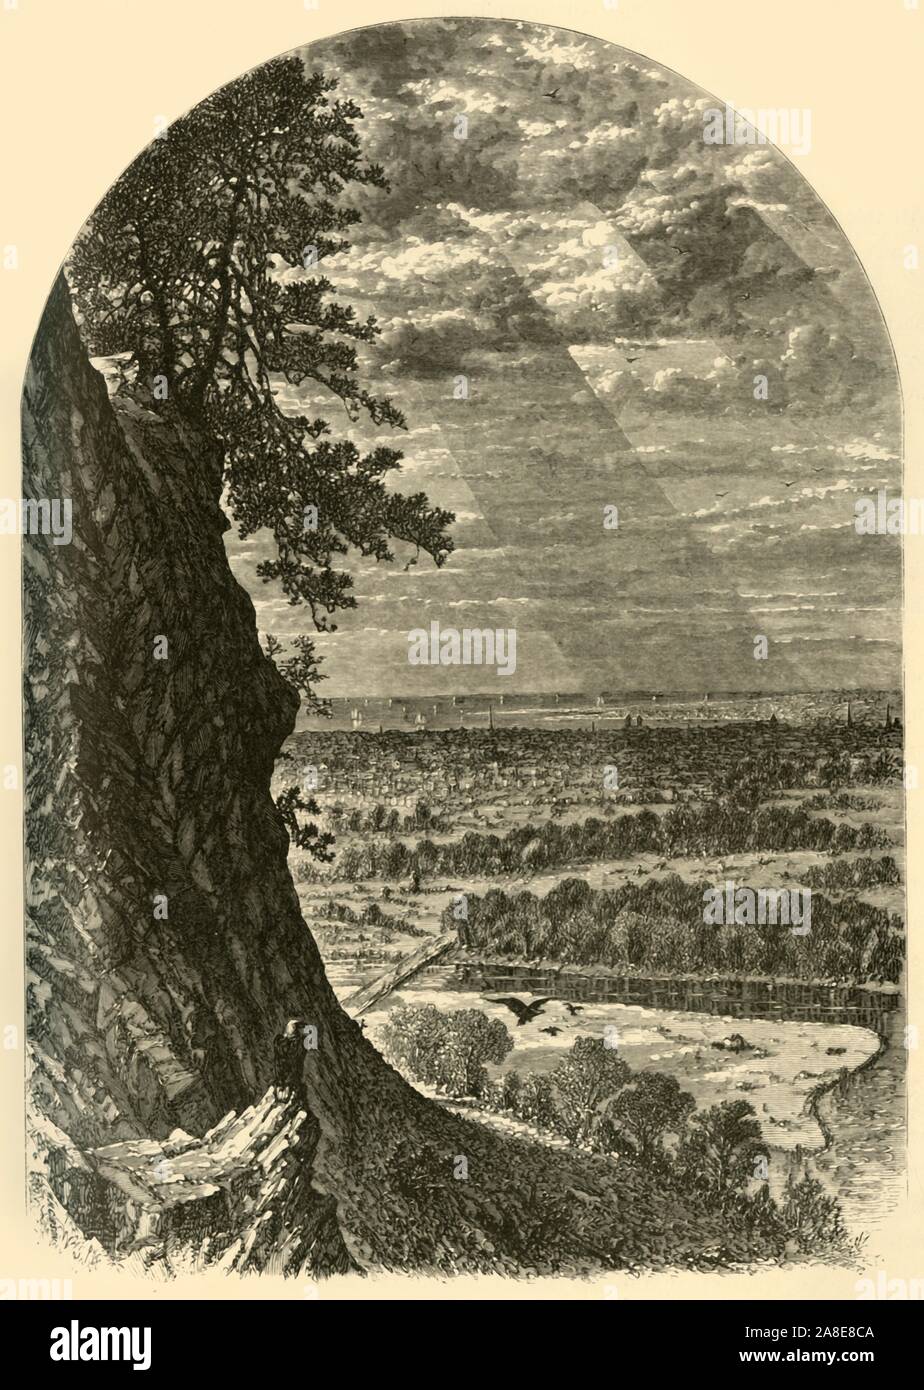 'New Haven, View from East Rock', 1874. Eagles on East Rock, with the Atlantic Ocean and the town of New Haven, Connecticut, USA, in the distance. From &quot;Picturesque America; or, The Land We Live In, A Delineation by Pen and Pencil of the Mountains, Rivers, Lakes...with Illustrations on Steel and Wood by Eminent American Artists&quot; Vol. II, edited by William Cullen Bryant. [D. Appleton and Company, New York, 1874] Stock Photo